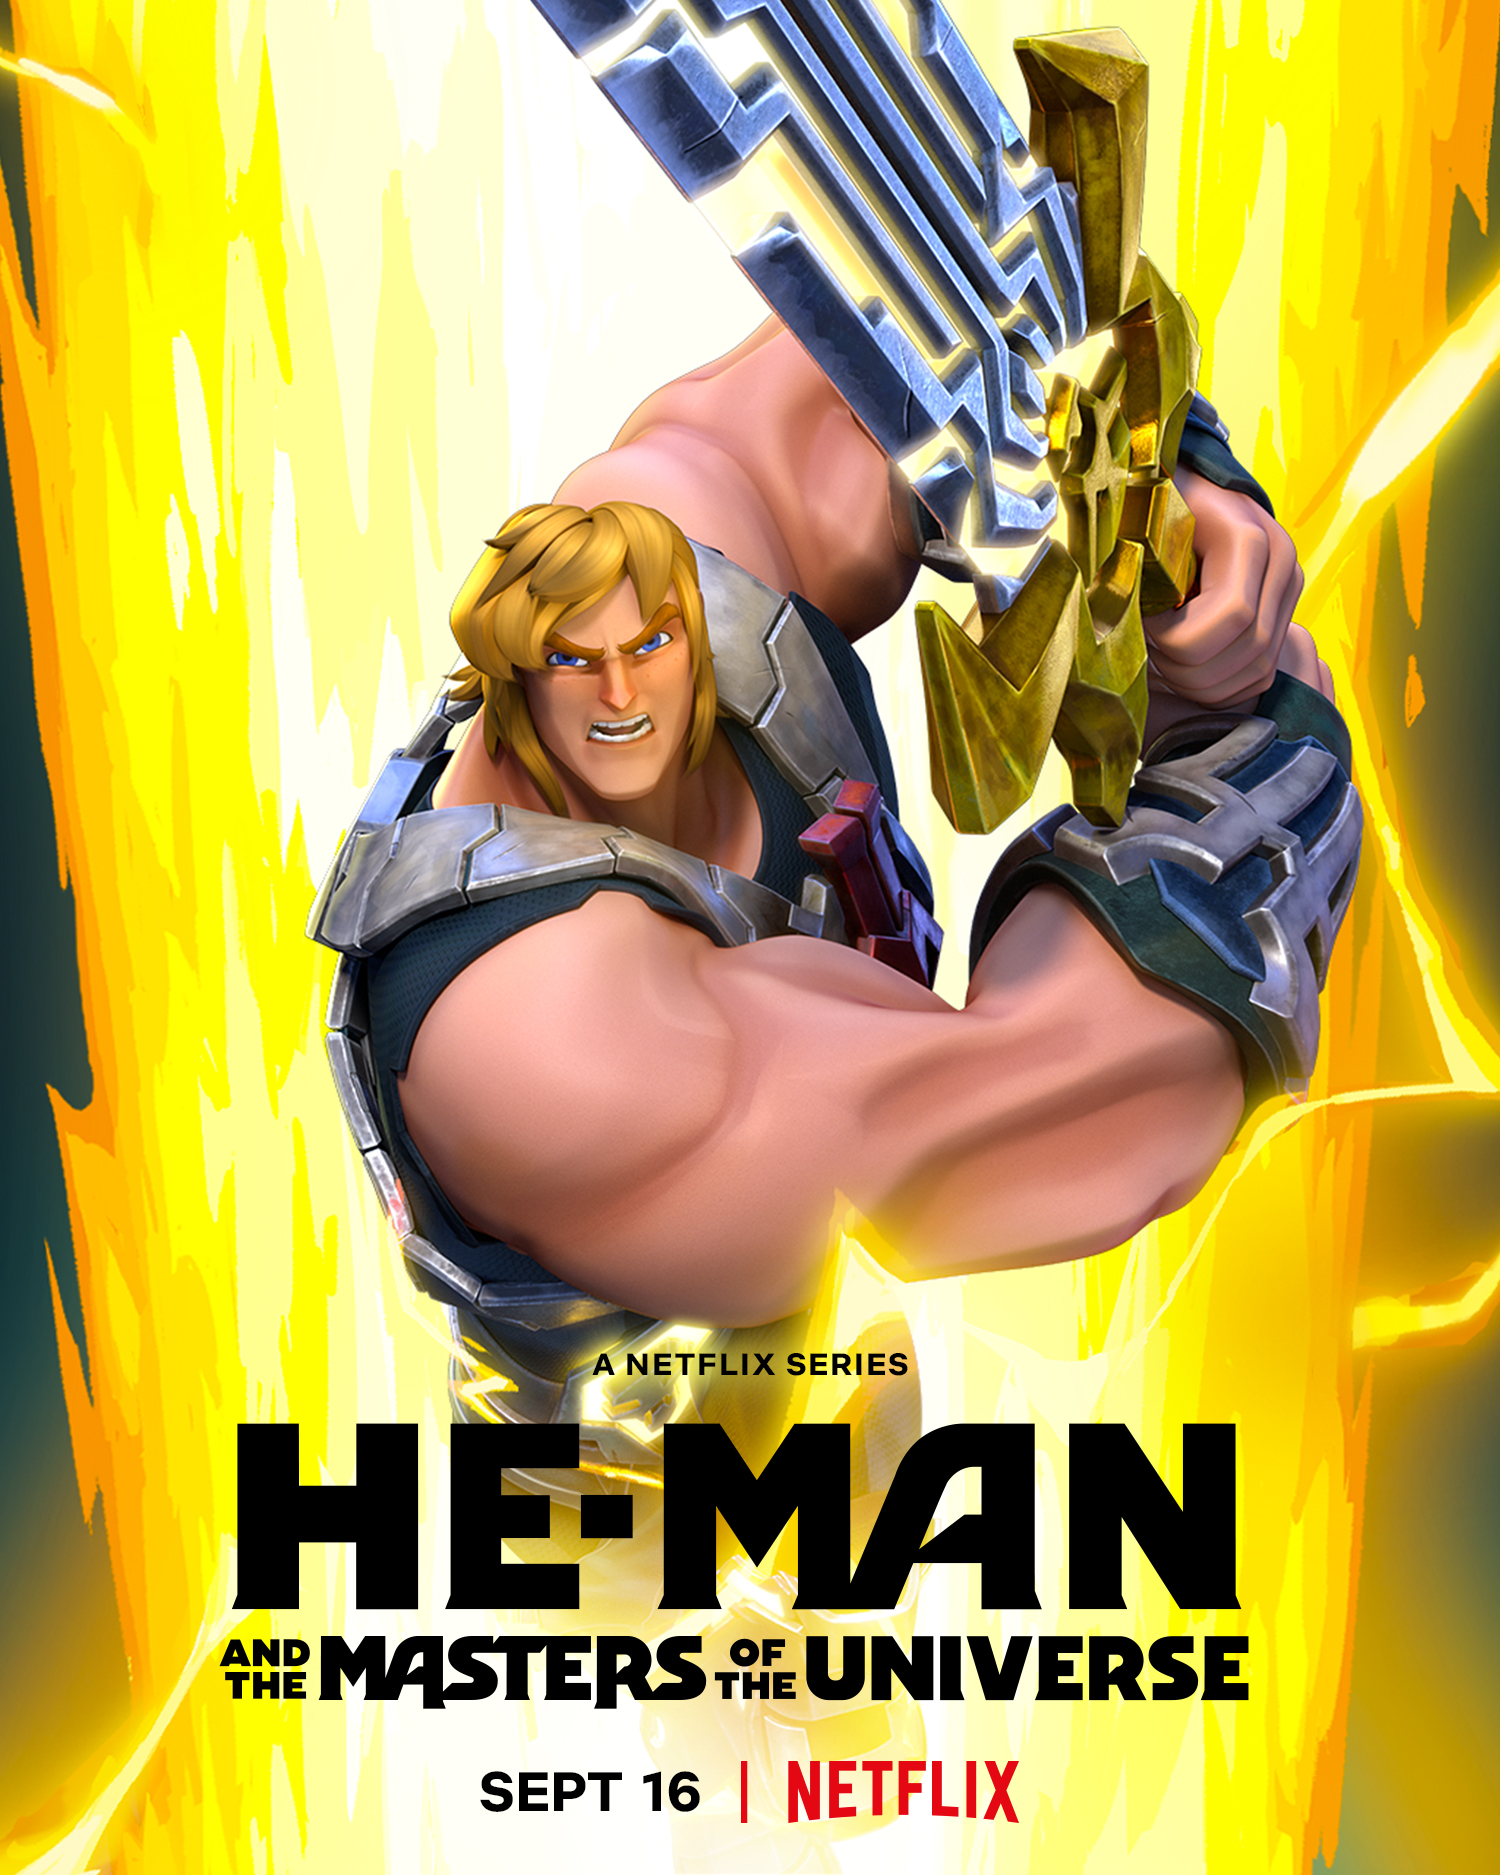 He-Man and the Masters of the Universe (Netflix series)